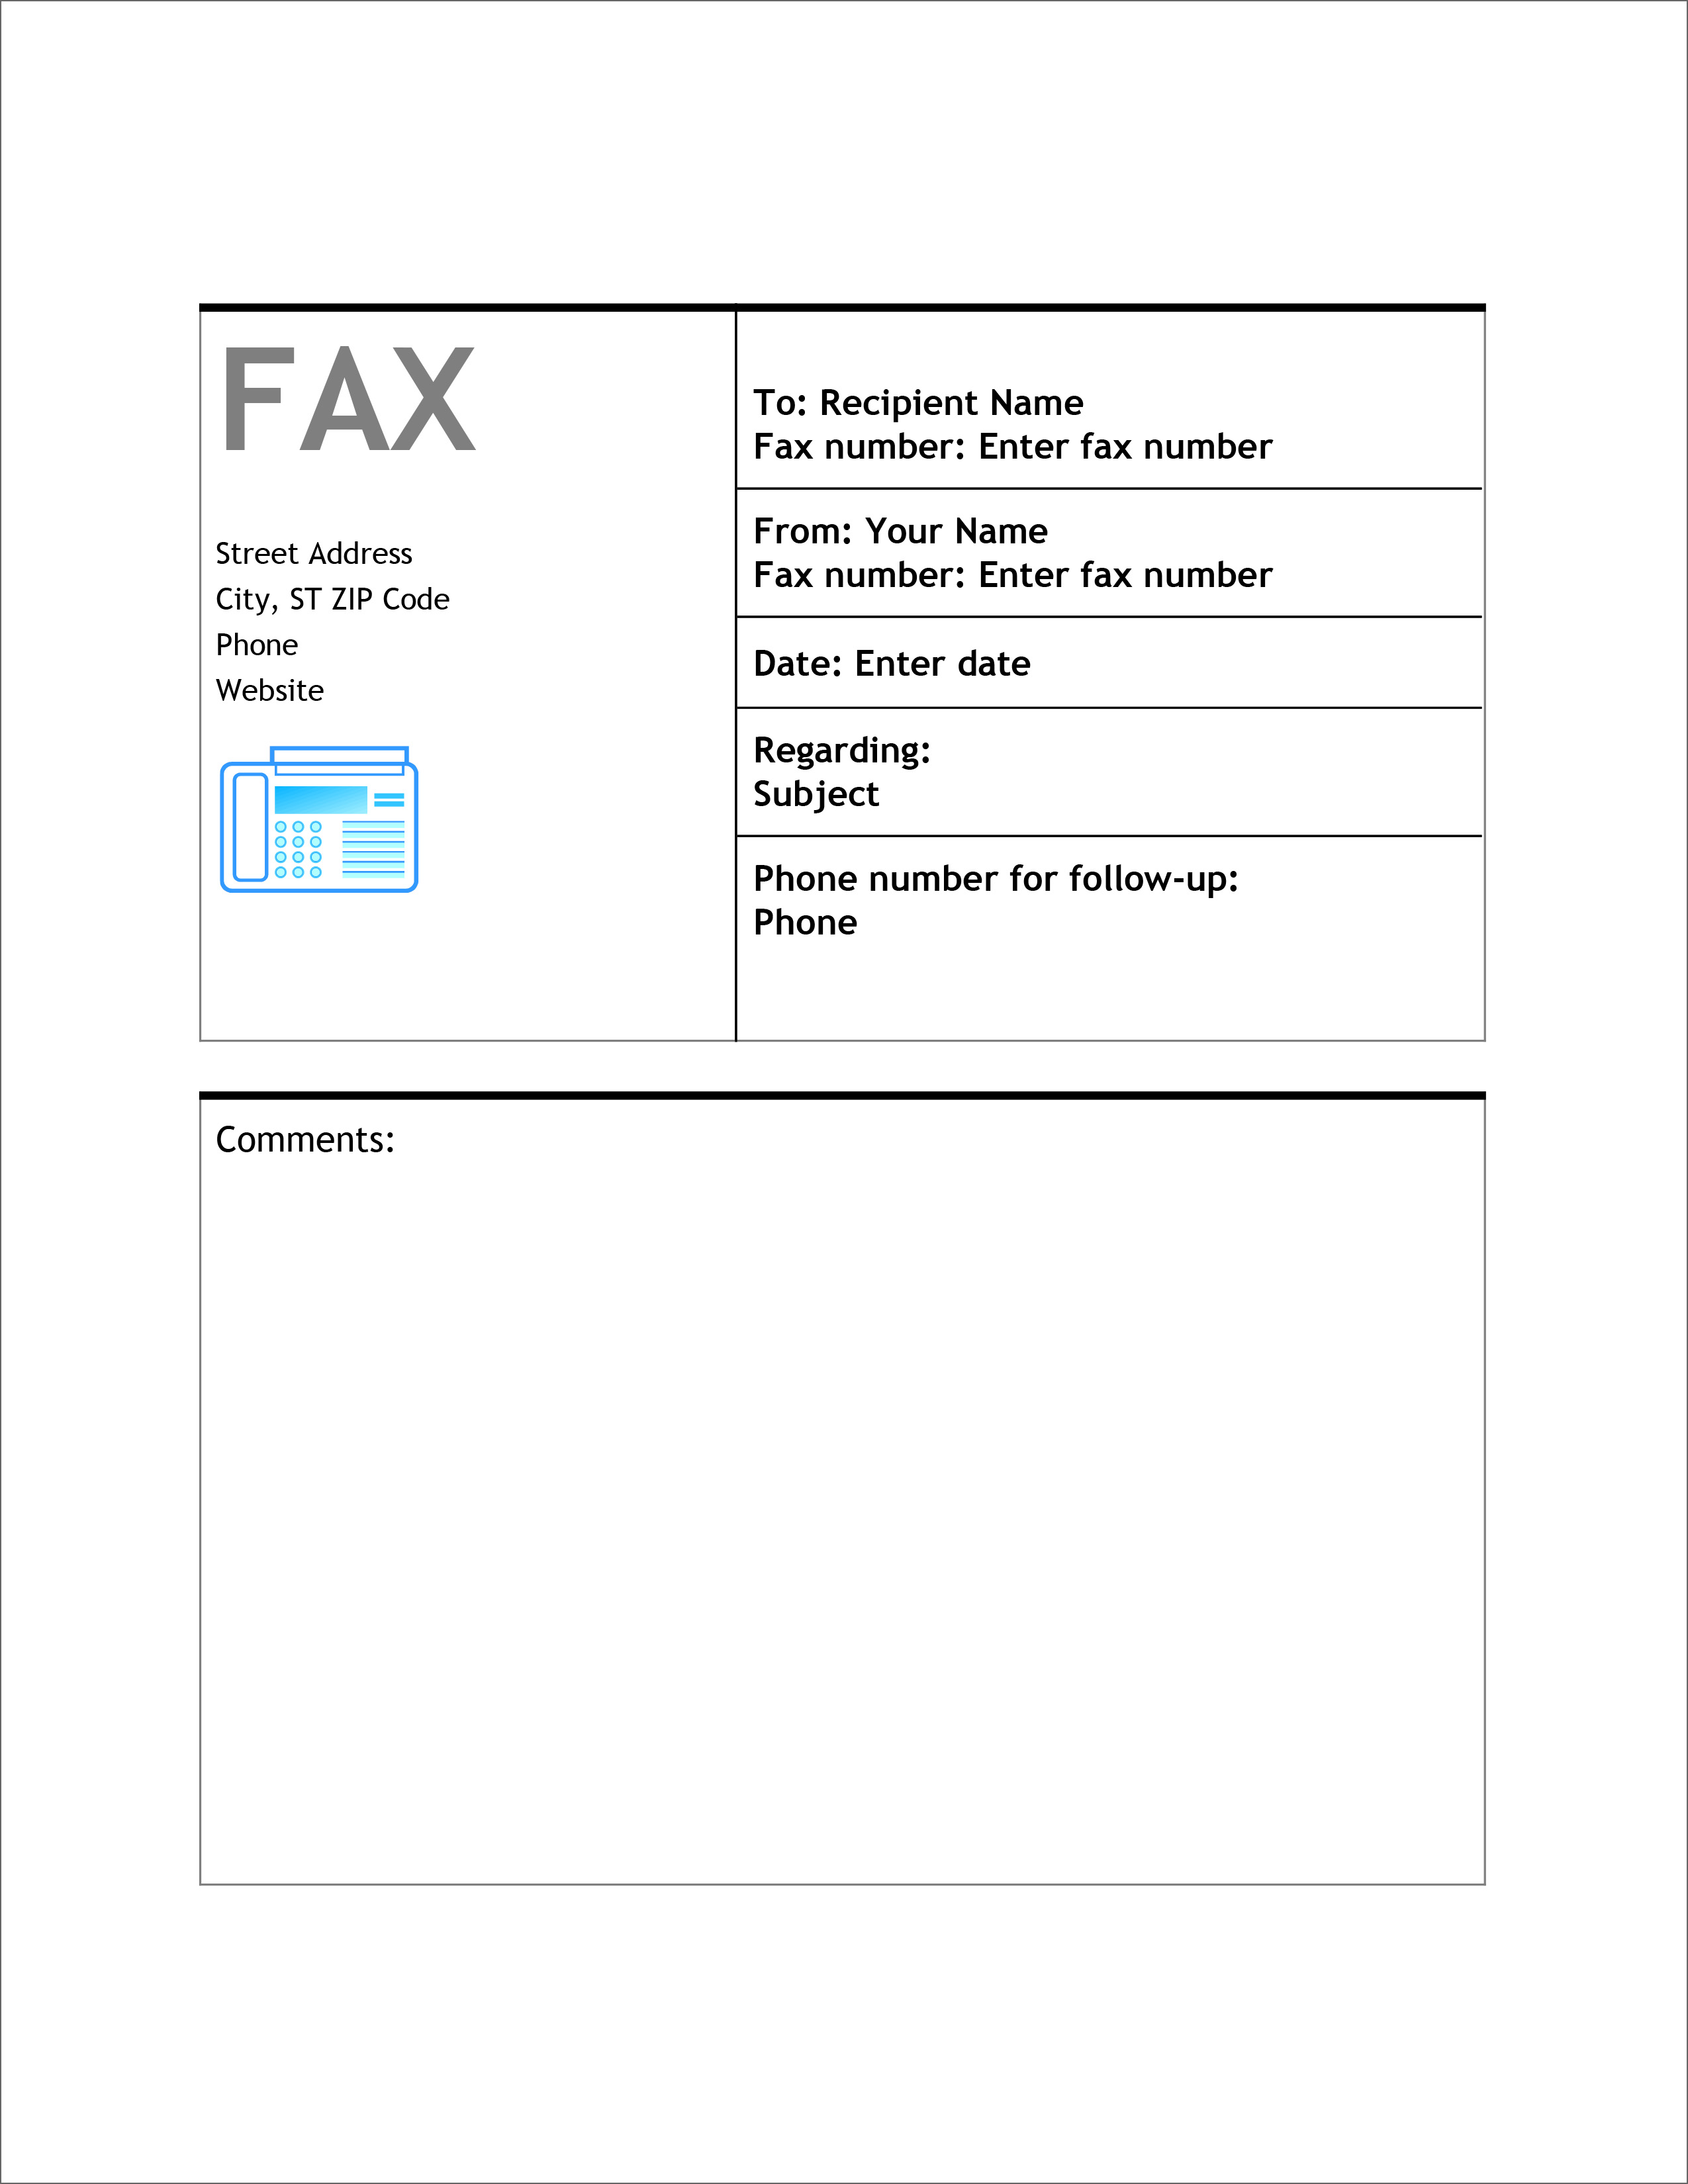 fax templates for mac